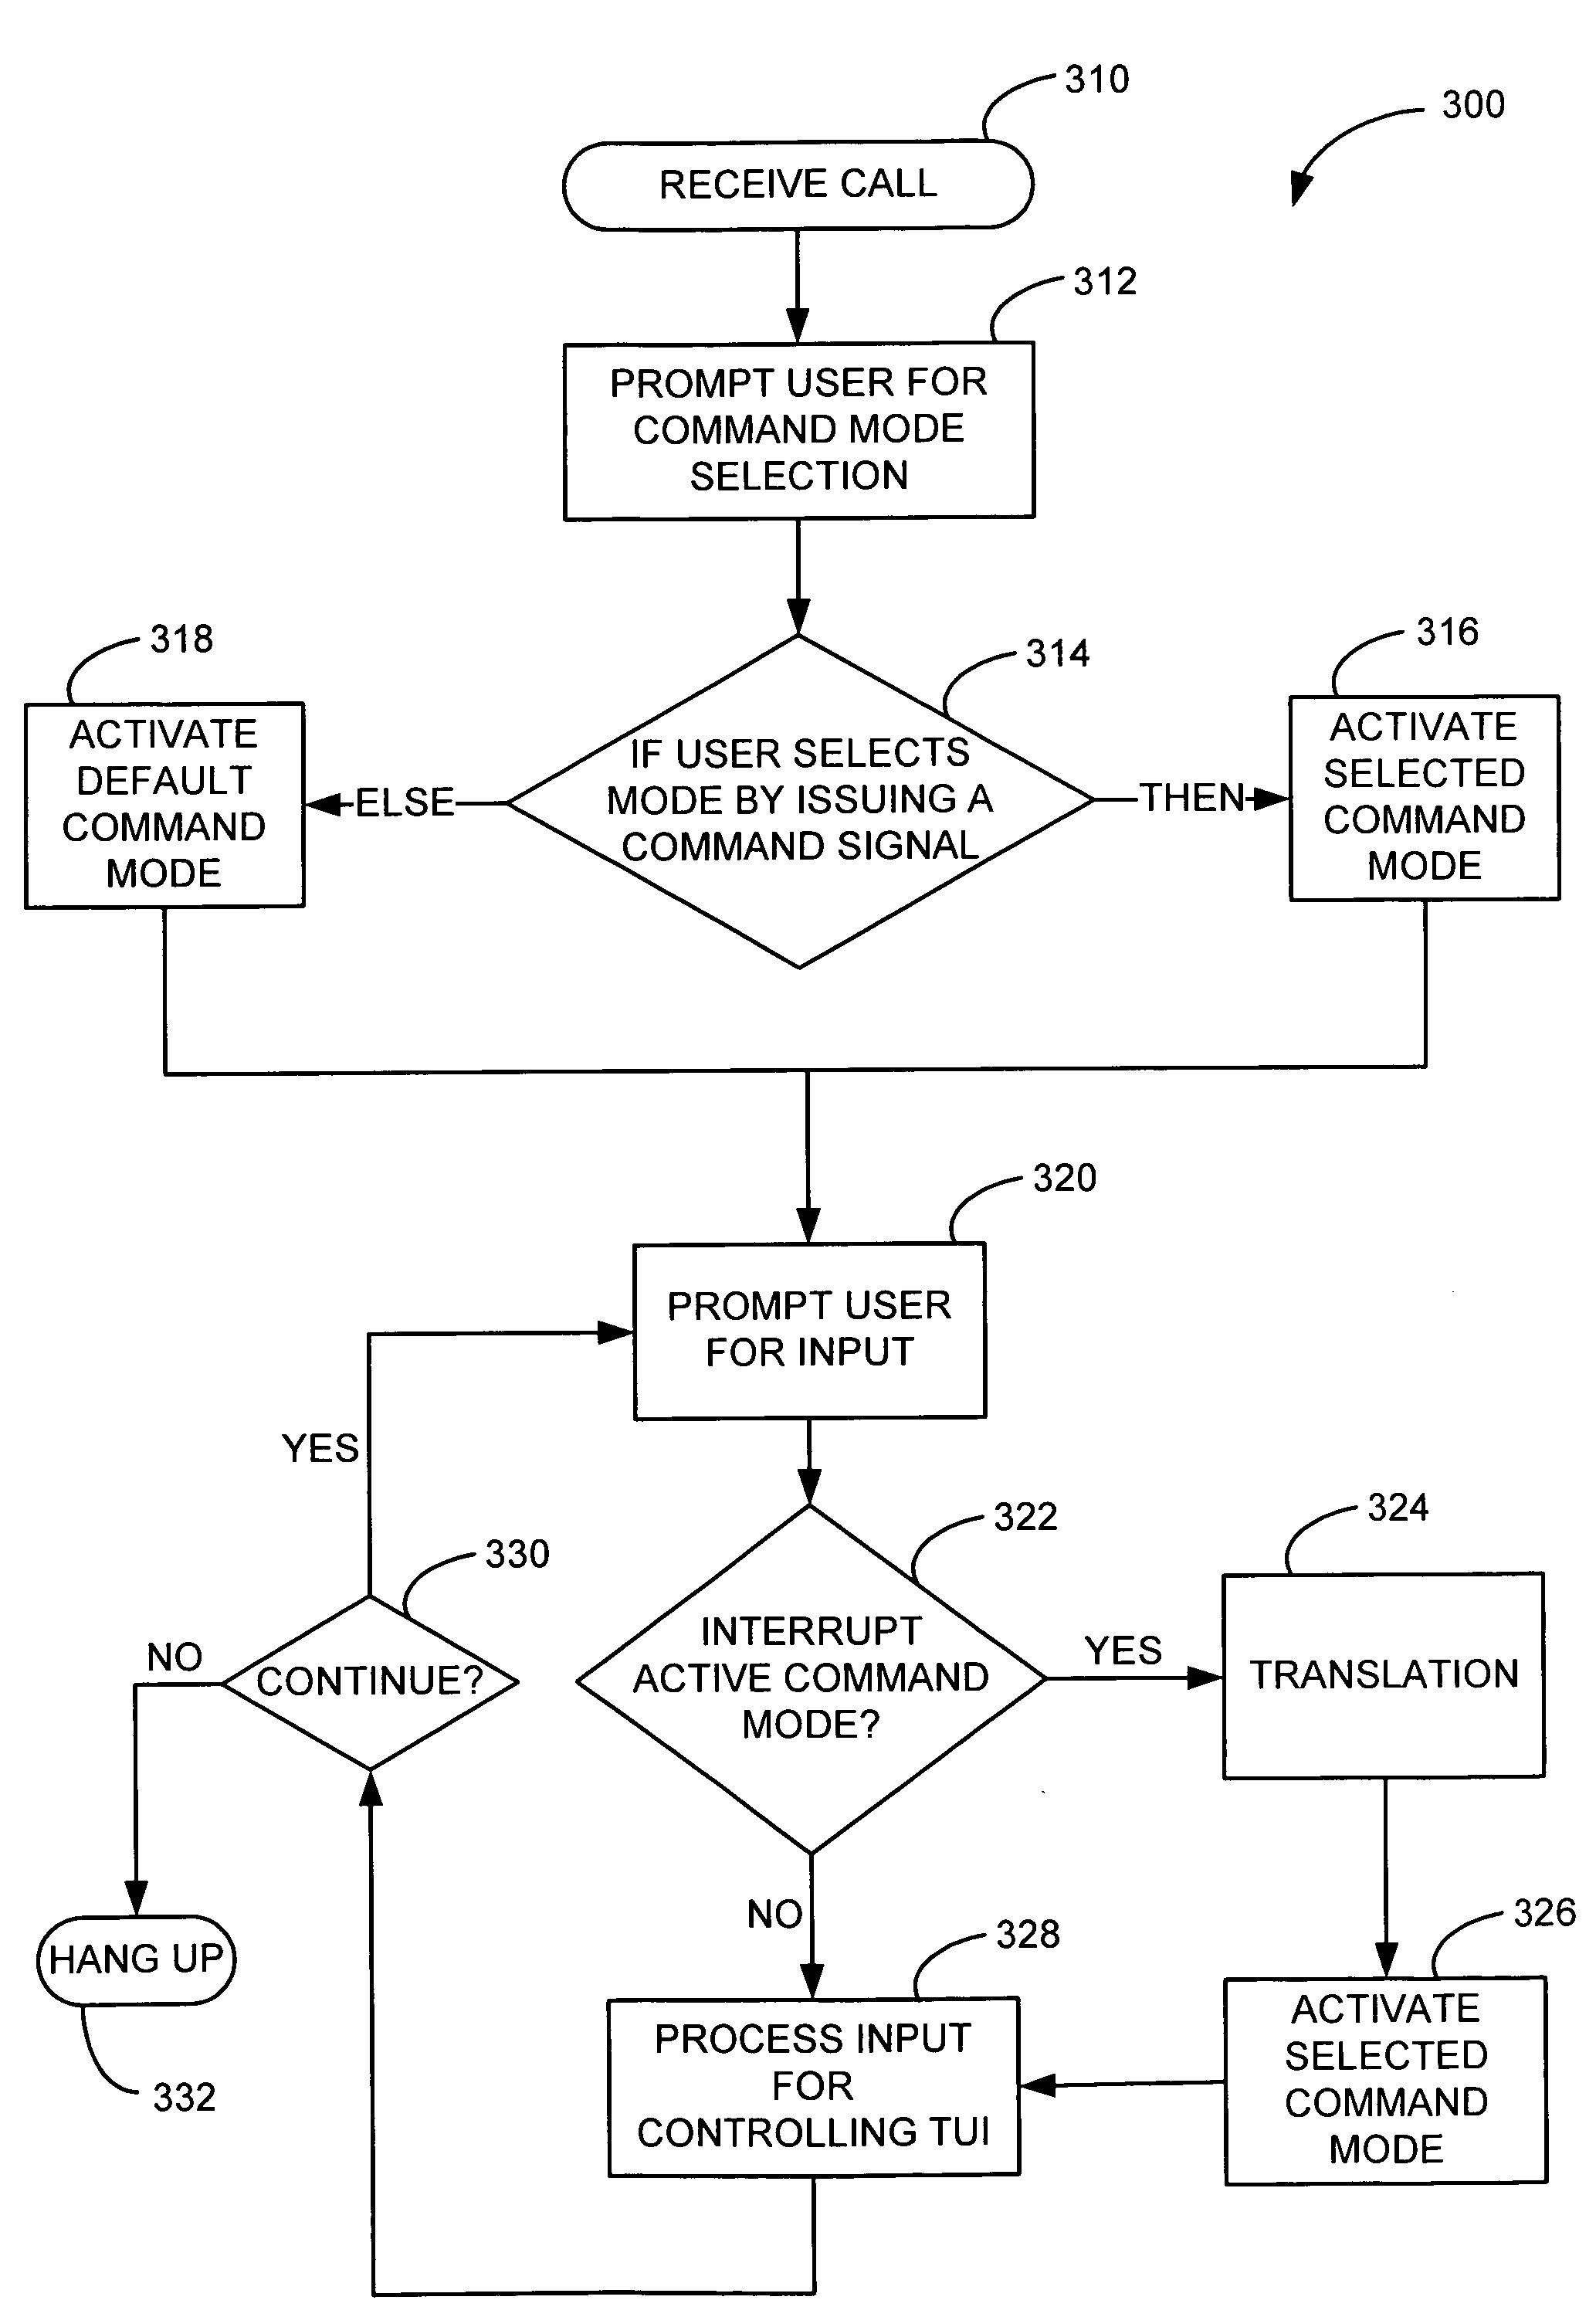 Integrated tone-based and voice-based telephone user interface